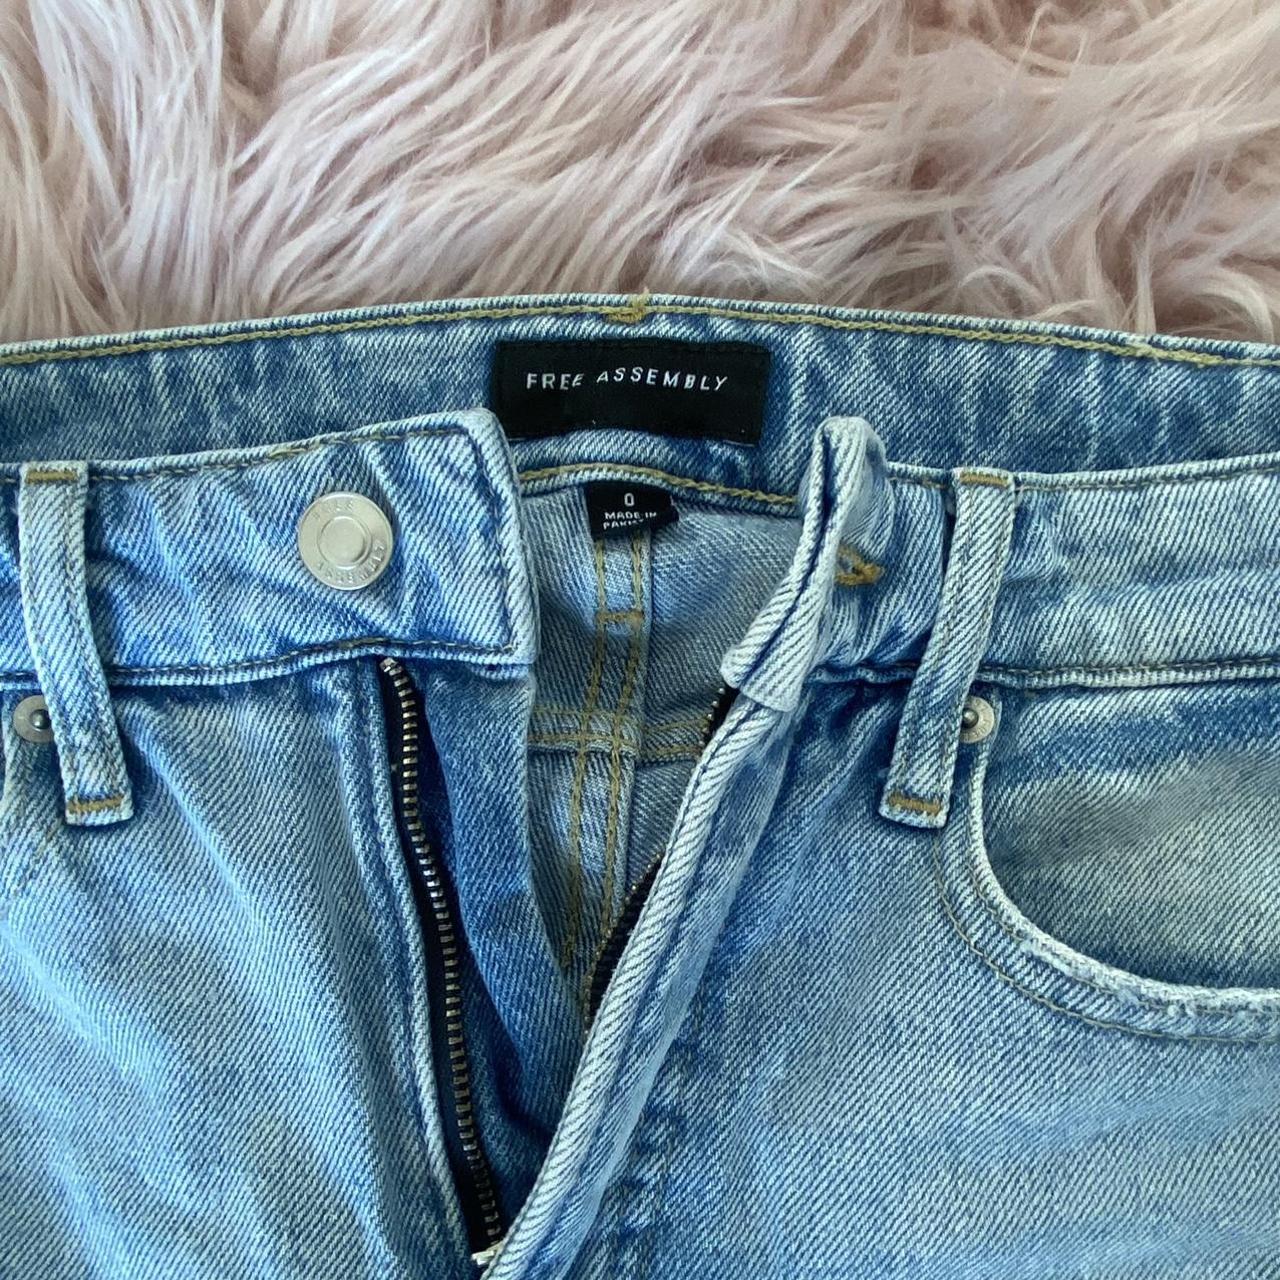 Free Assembly Women's Jeans (2)